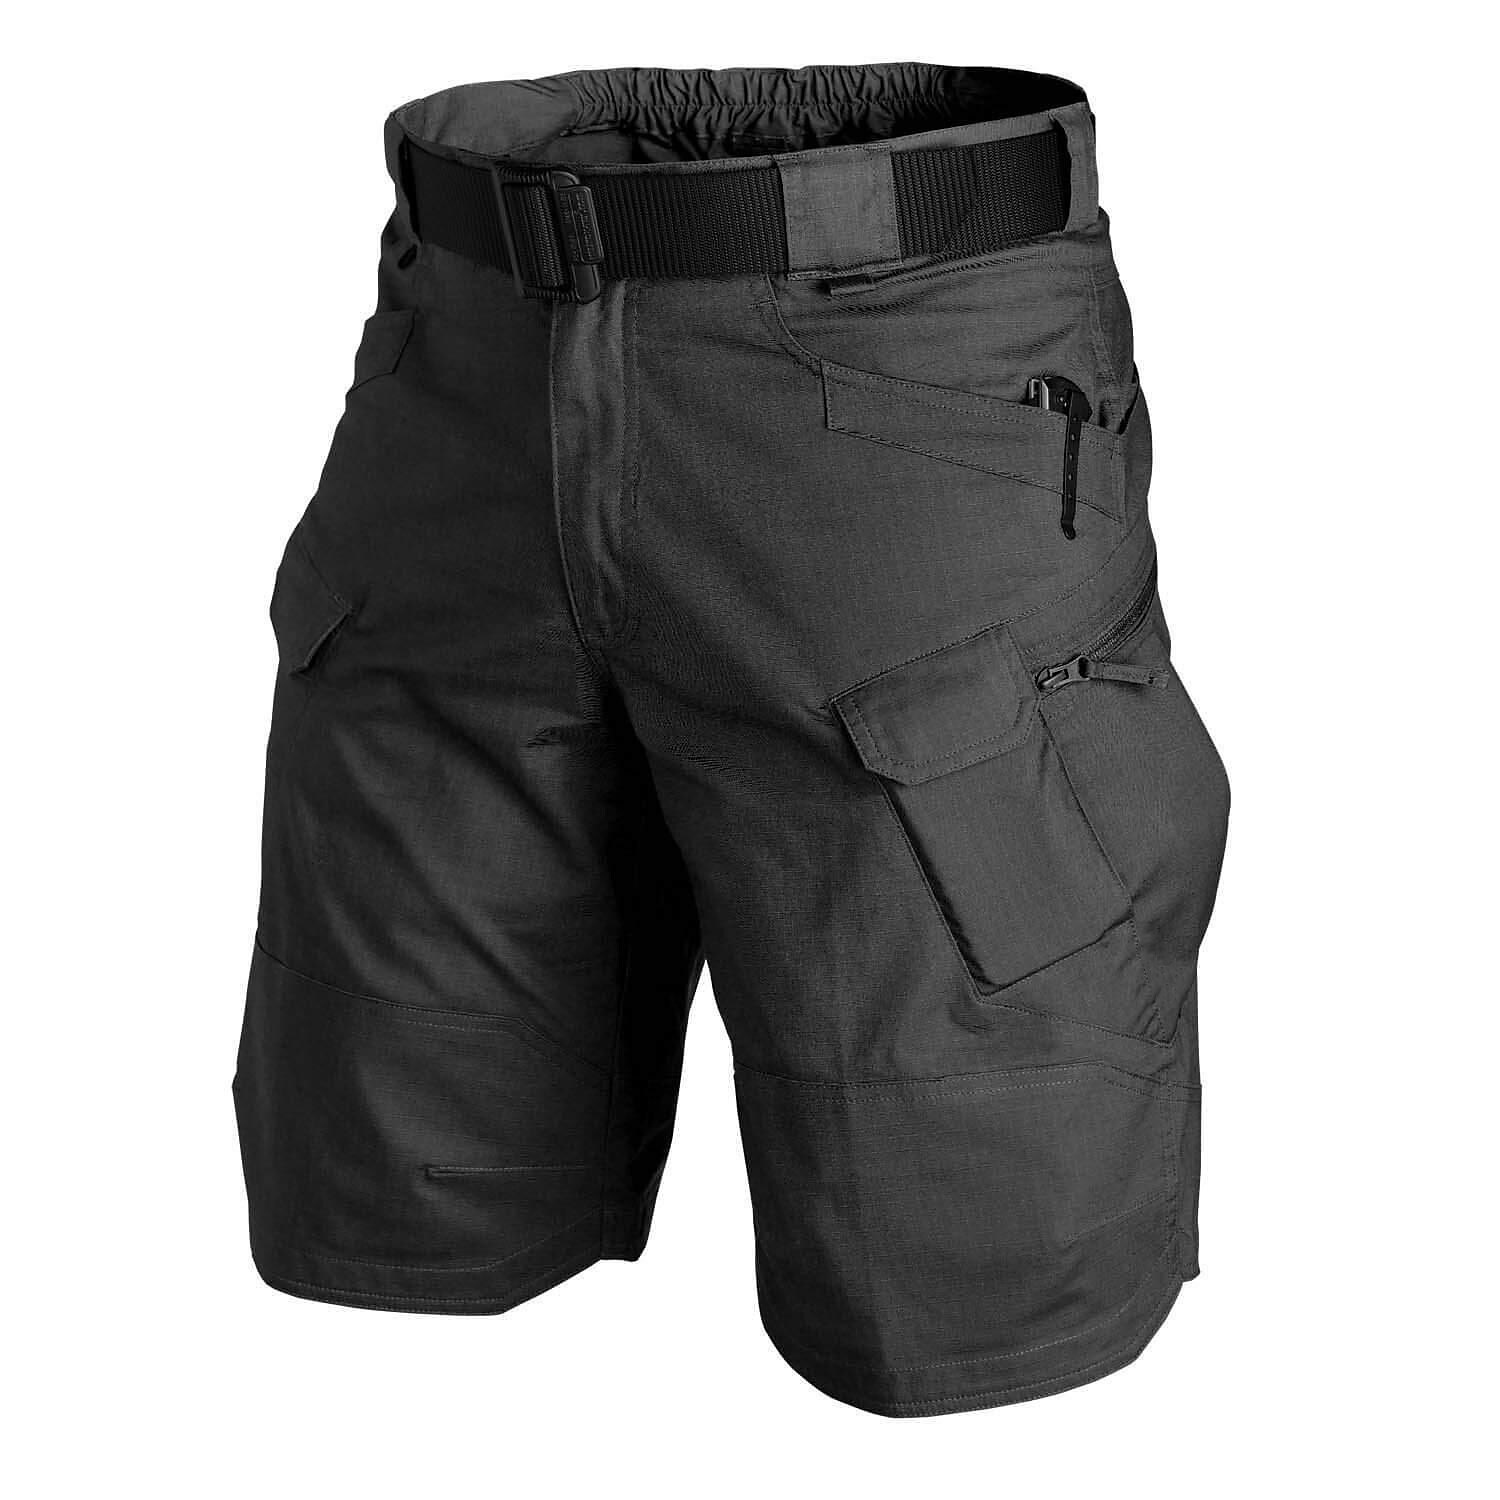 Men's Hiking Tactical Military Ripstop Breathable Quick Dry Lightweight  Outdoor Cargo Shorts